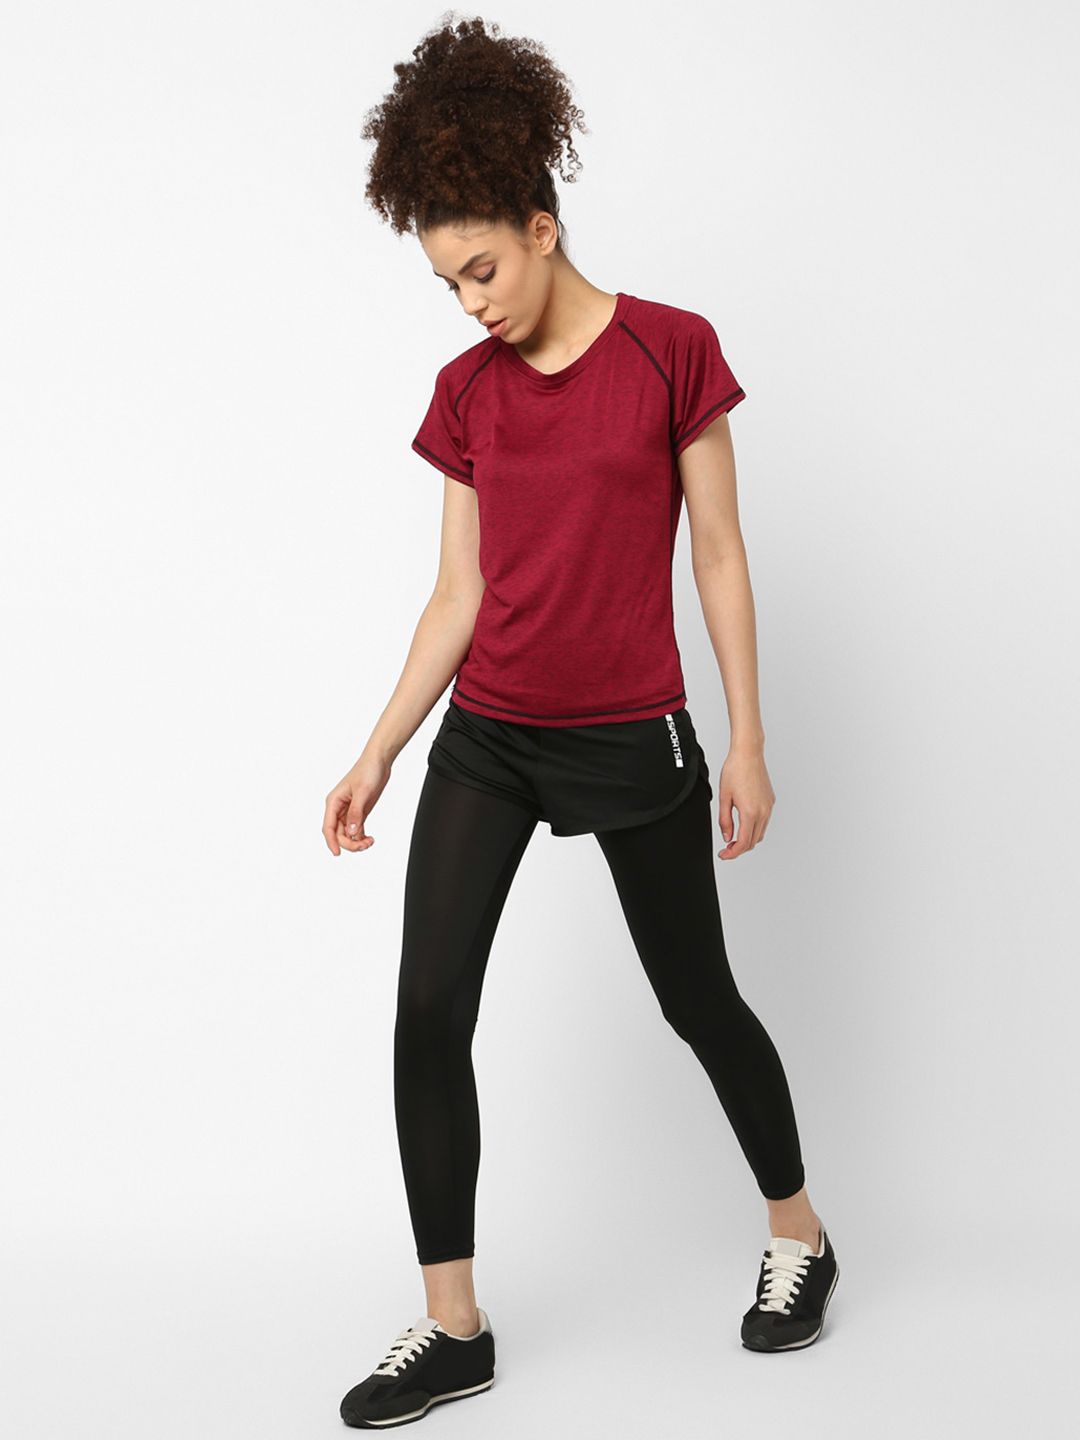 JerfSports Women Maroon & Black Solid T-shirt with Shorts With Attached Tights Tracksuit Price in India